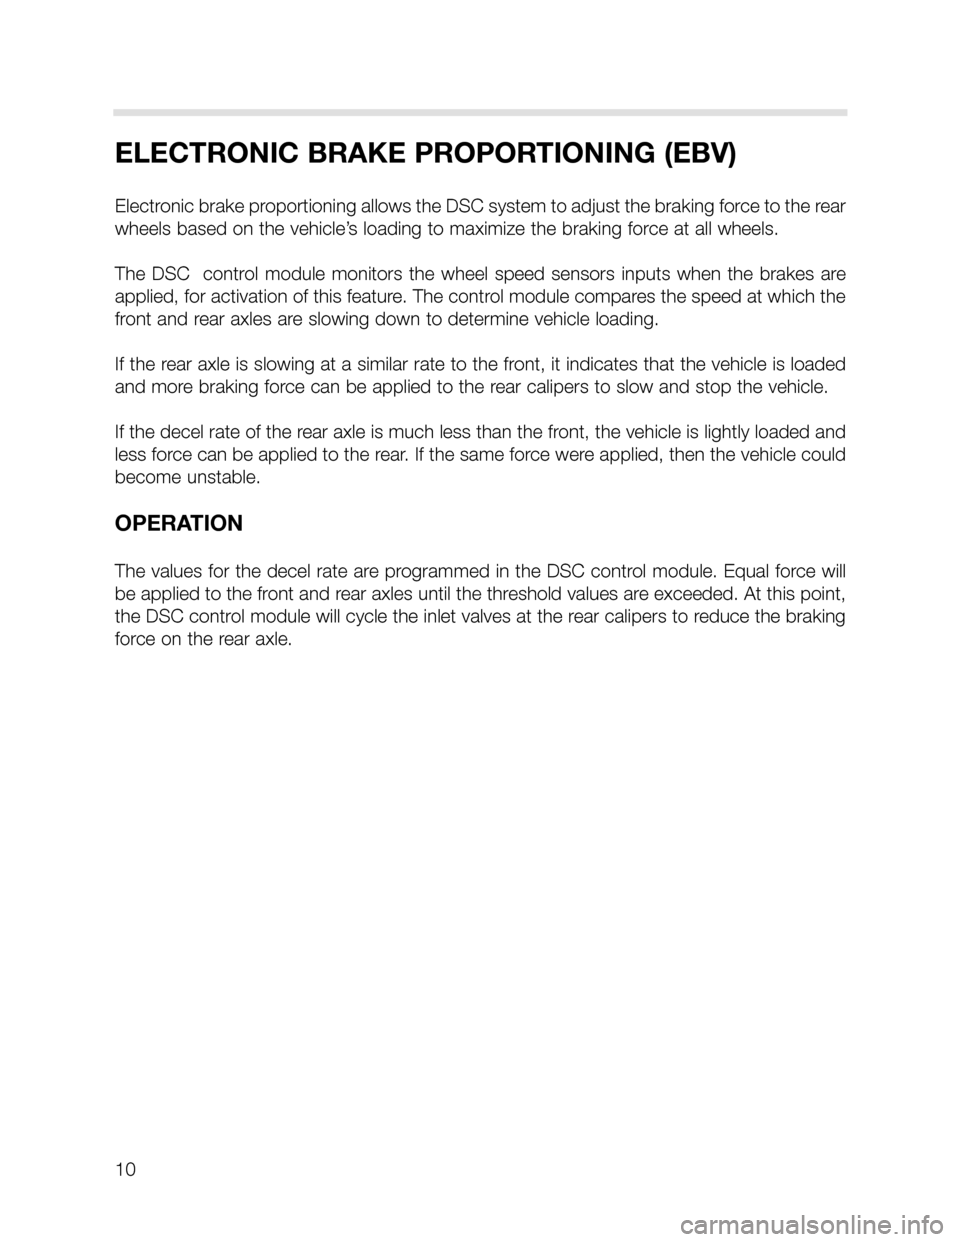 BMW X5 2000 E53 DSC System Workshop Manual 10
ELECTRONIC BRAKE PROPORTIONING (EBV)
Electronic brake proportioning allows the DSC system to adjust the braking force to the rear
wheels based on the vehicle’s loading to maximize the braking for